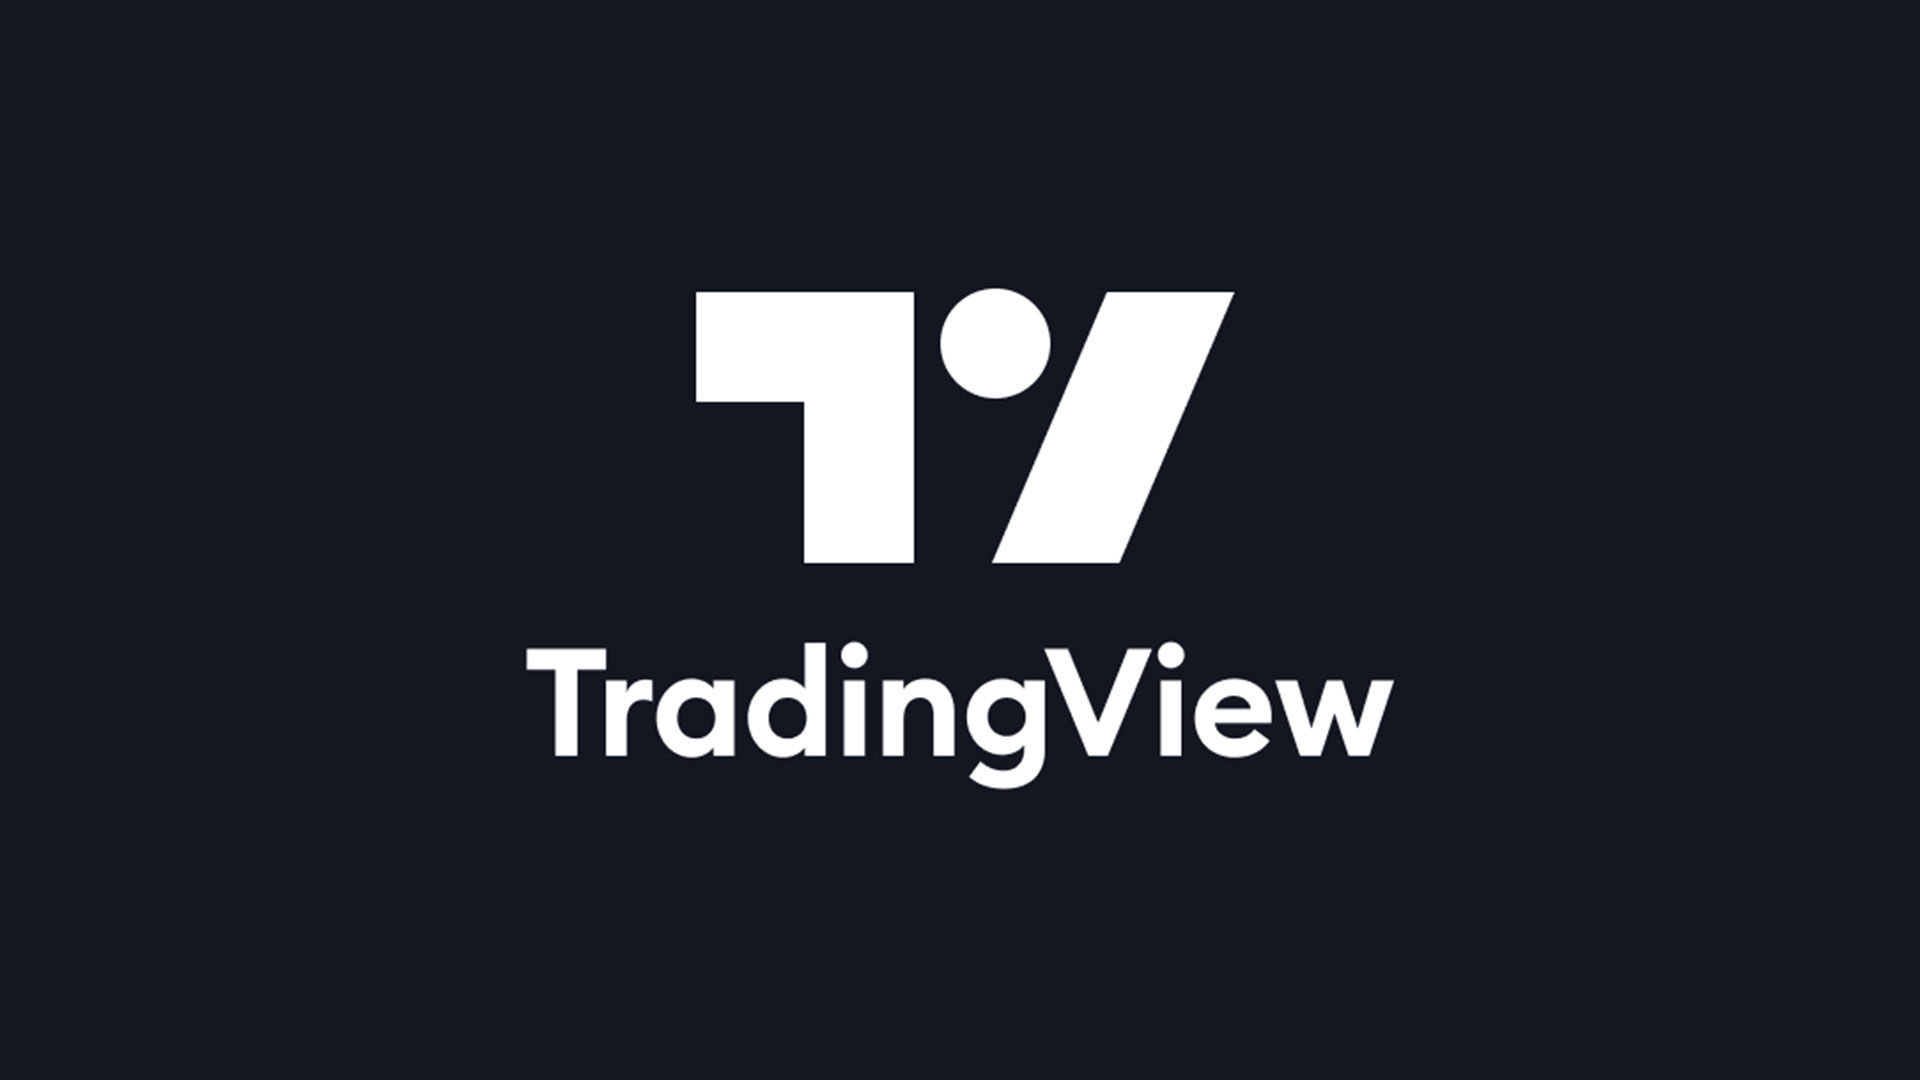 How to Change the Candles on TradingView